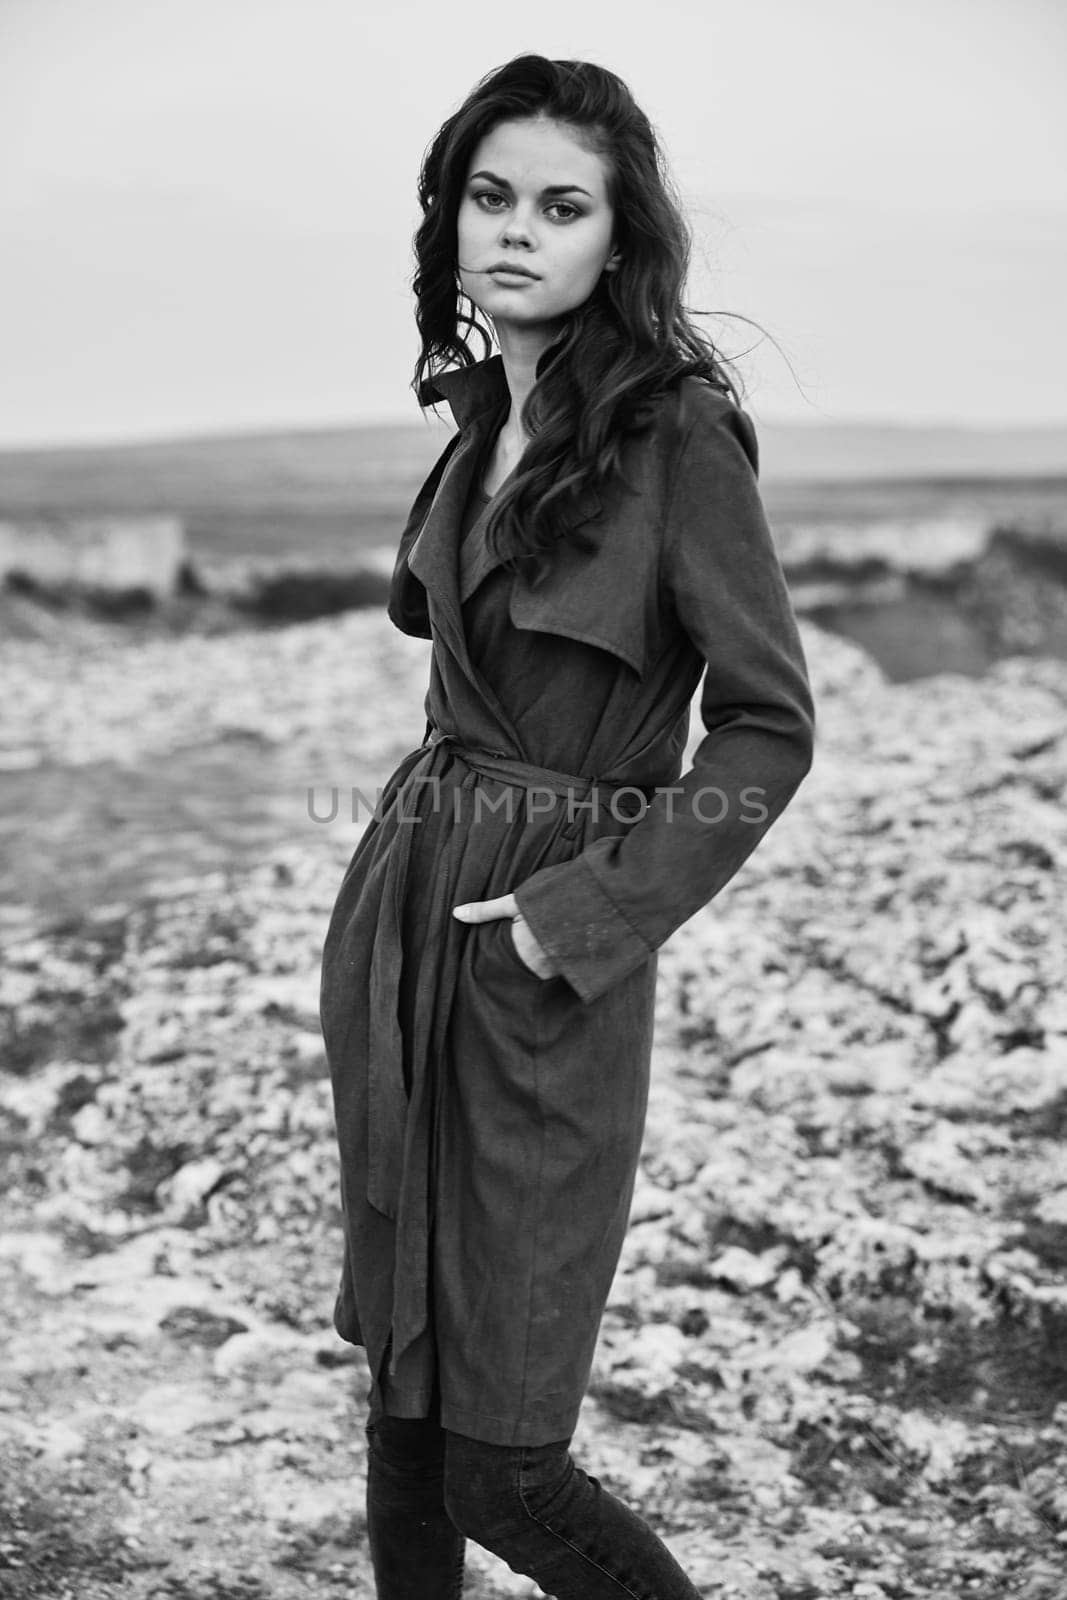 Mysterious woman in trench coat standing confidently on rocky hilltop